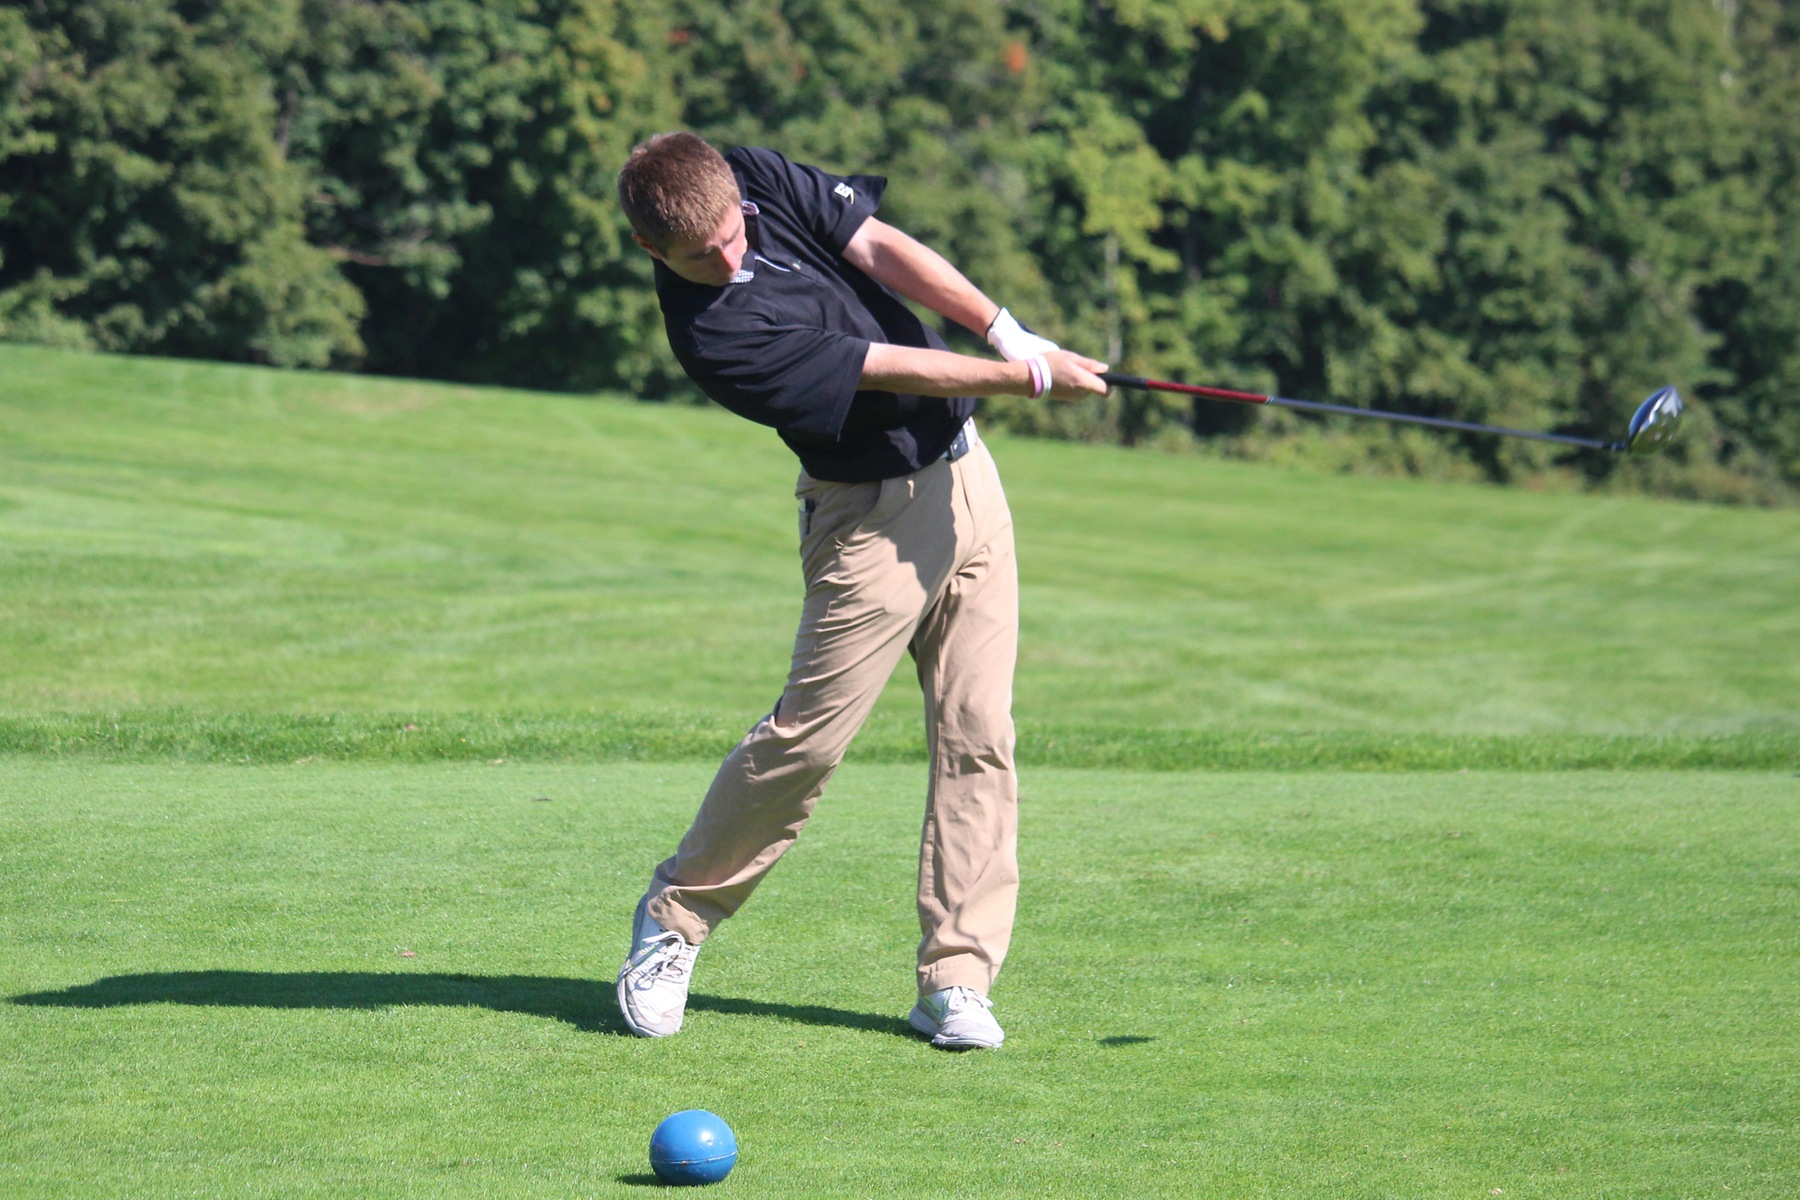 Golf Finishes 10th At NEIGA To Wrap Up Season